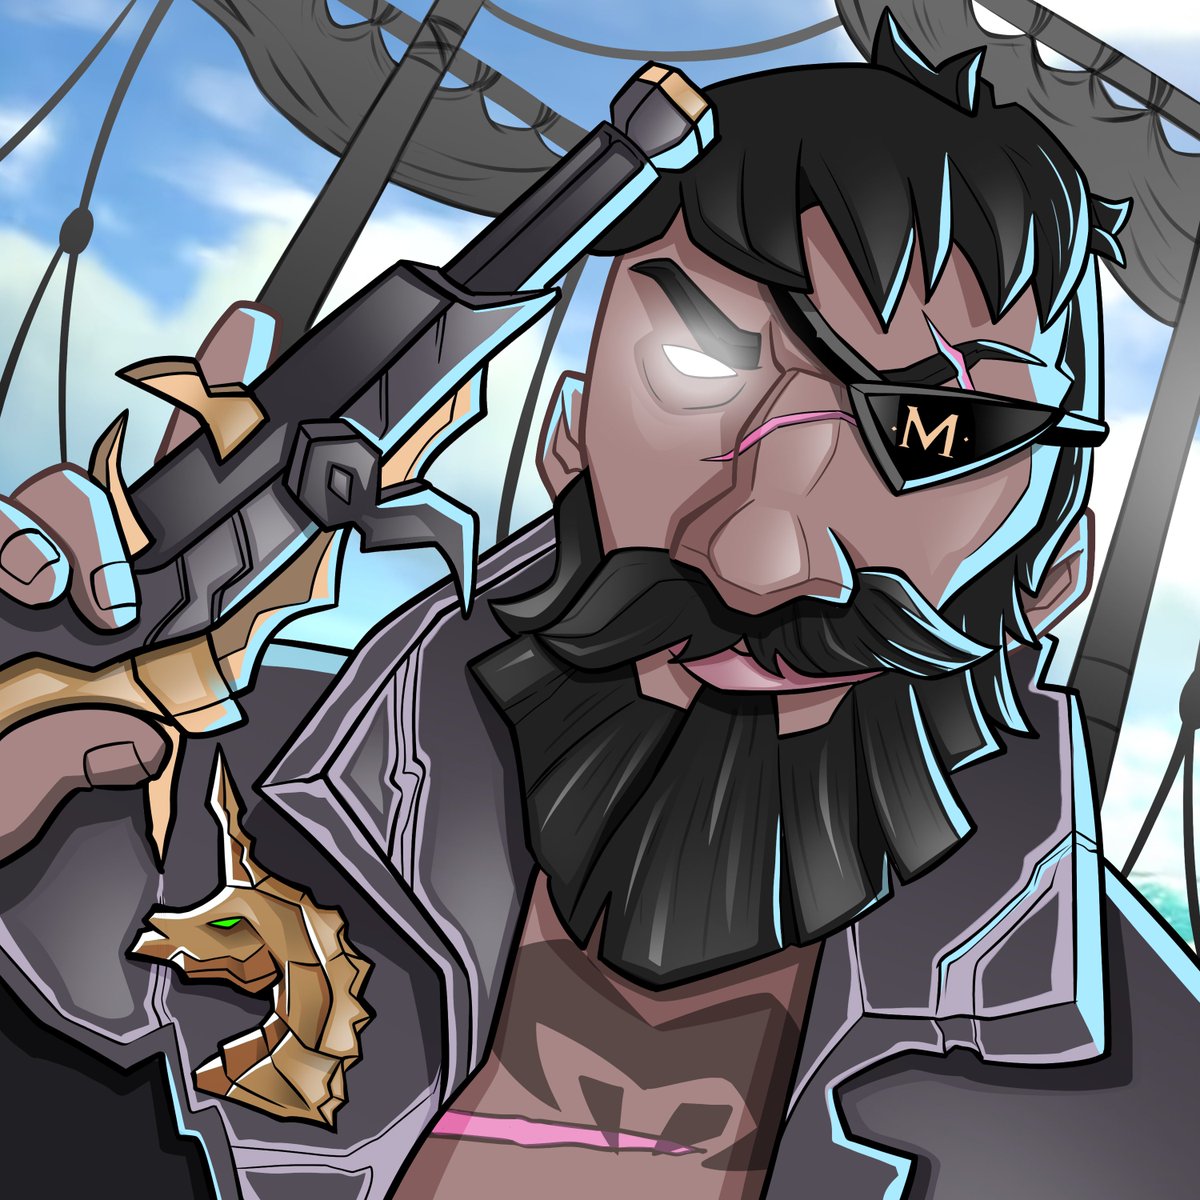 finished drawing! Commission for @Magic4Lyfe23 #SeaOfThieves #BeMorePirate